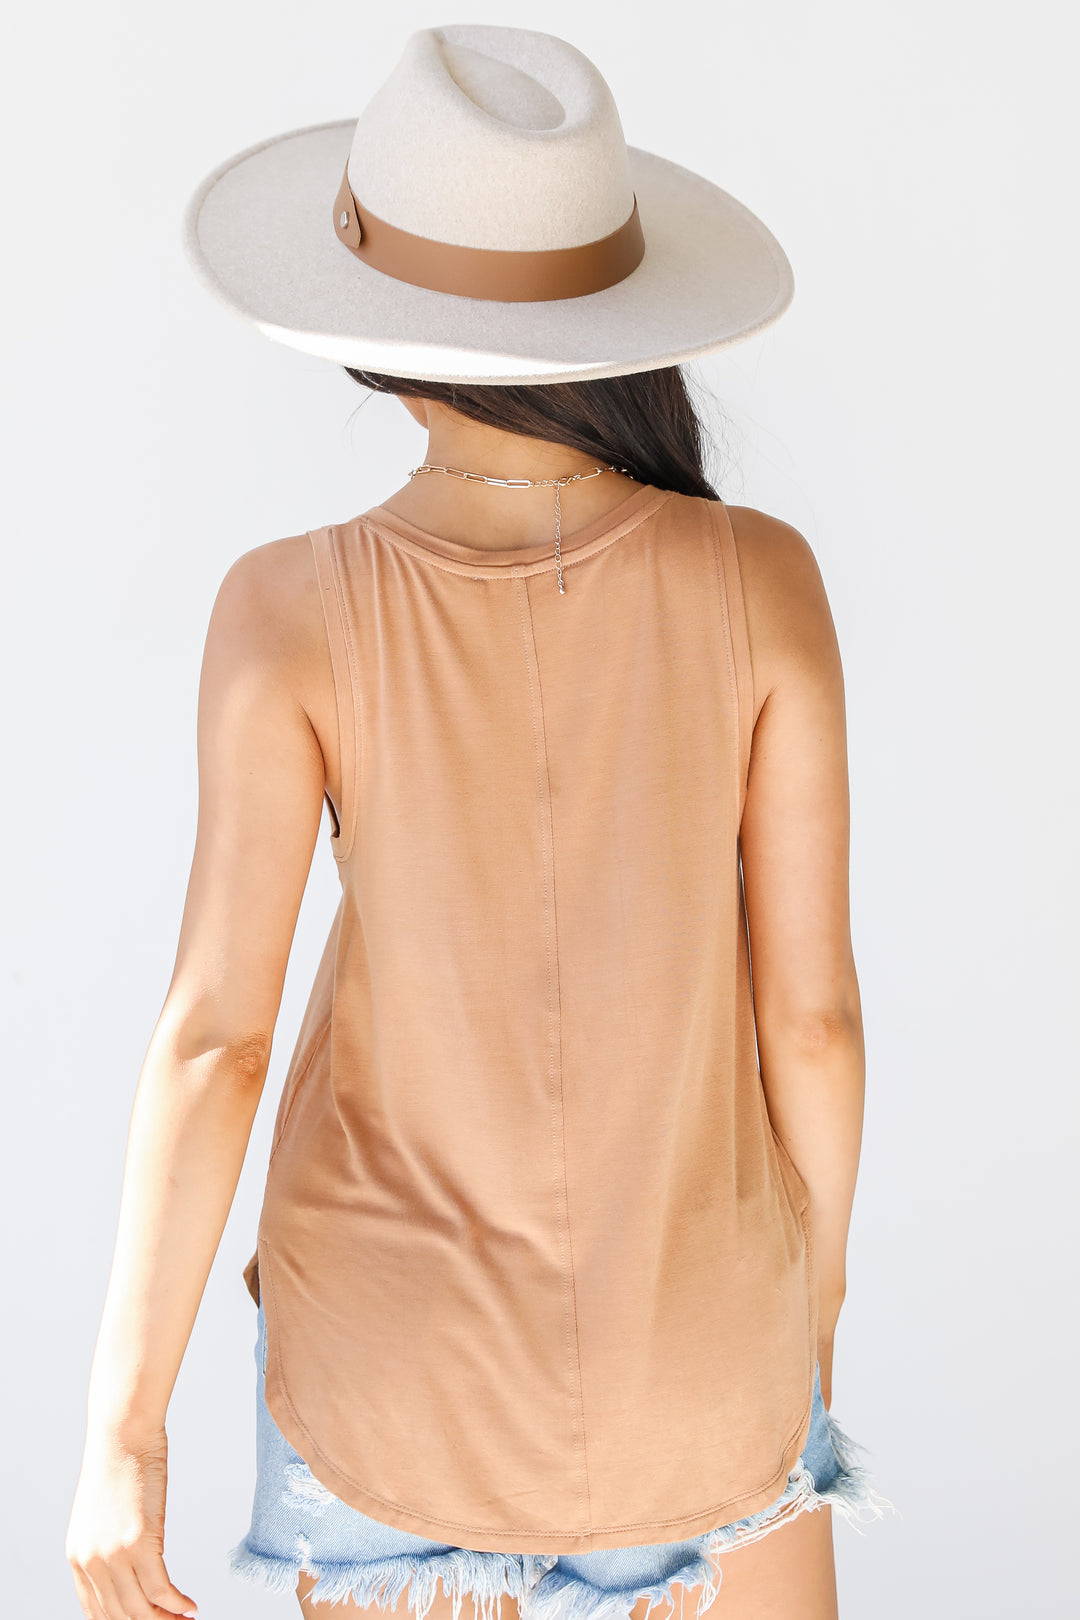 Jersey Knit Tank in camel back view